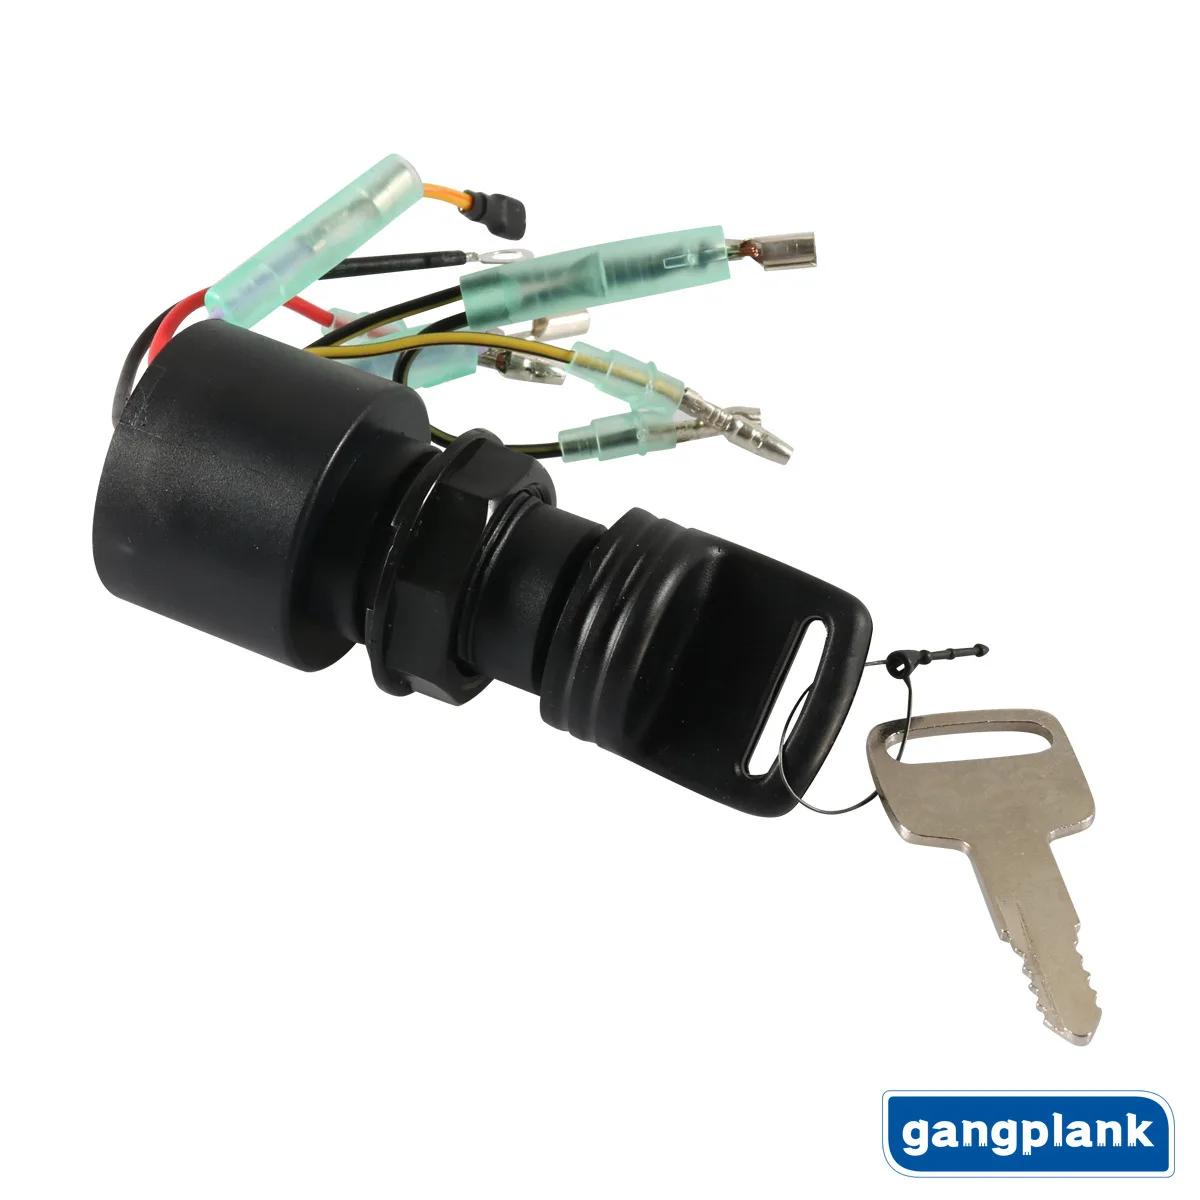 

Ignition Switch Boat Engine Motor Side Control Start Switch 87-17009A5 for Mercury 8717009A2 MP410702 8717009A5 Outboard Motor